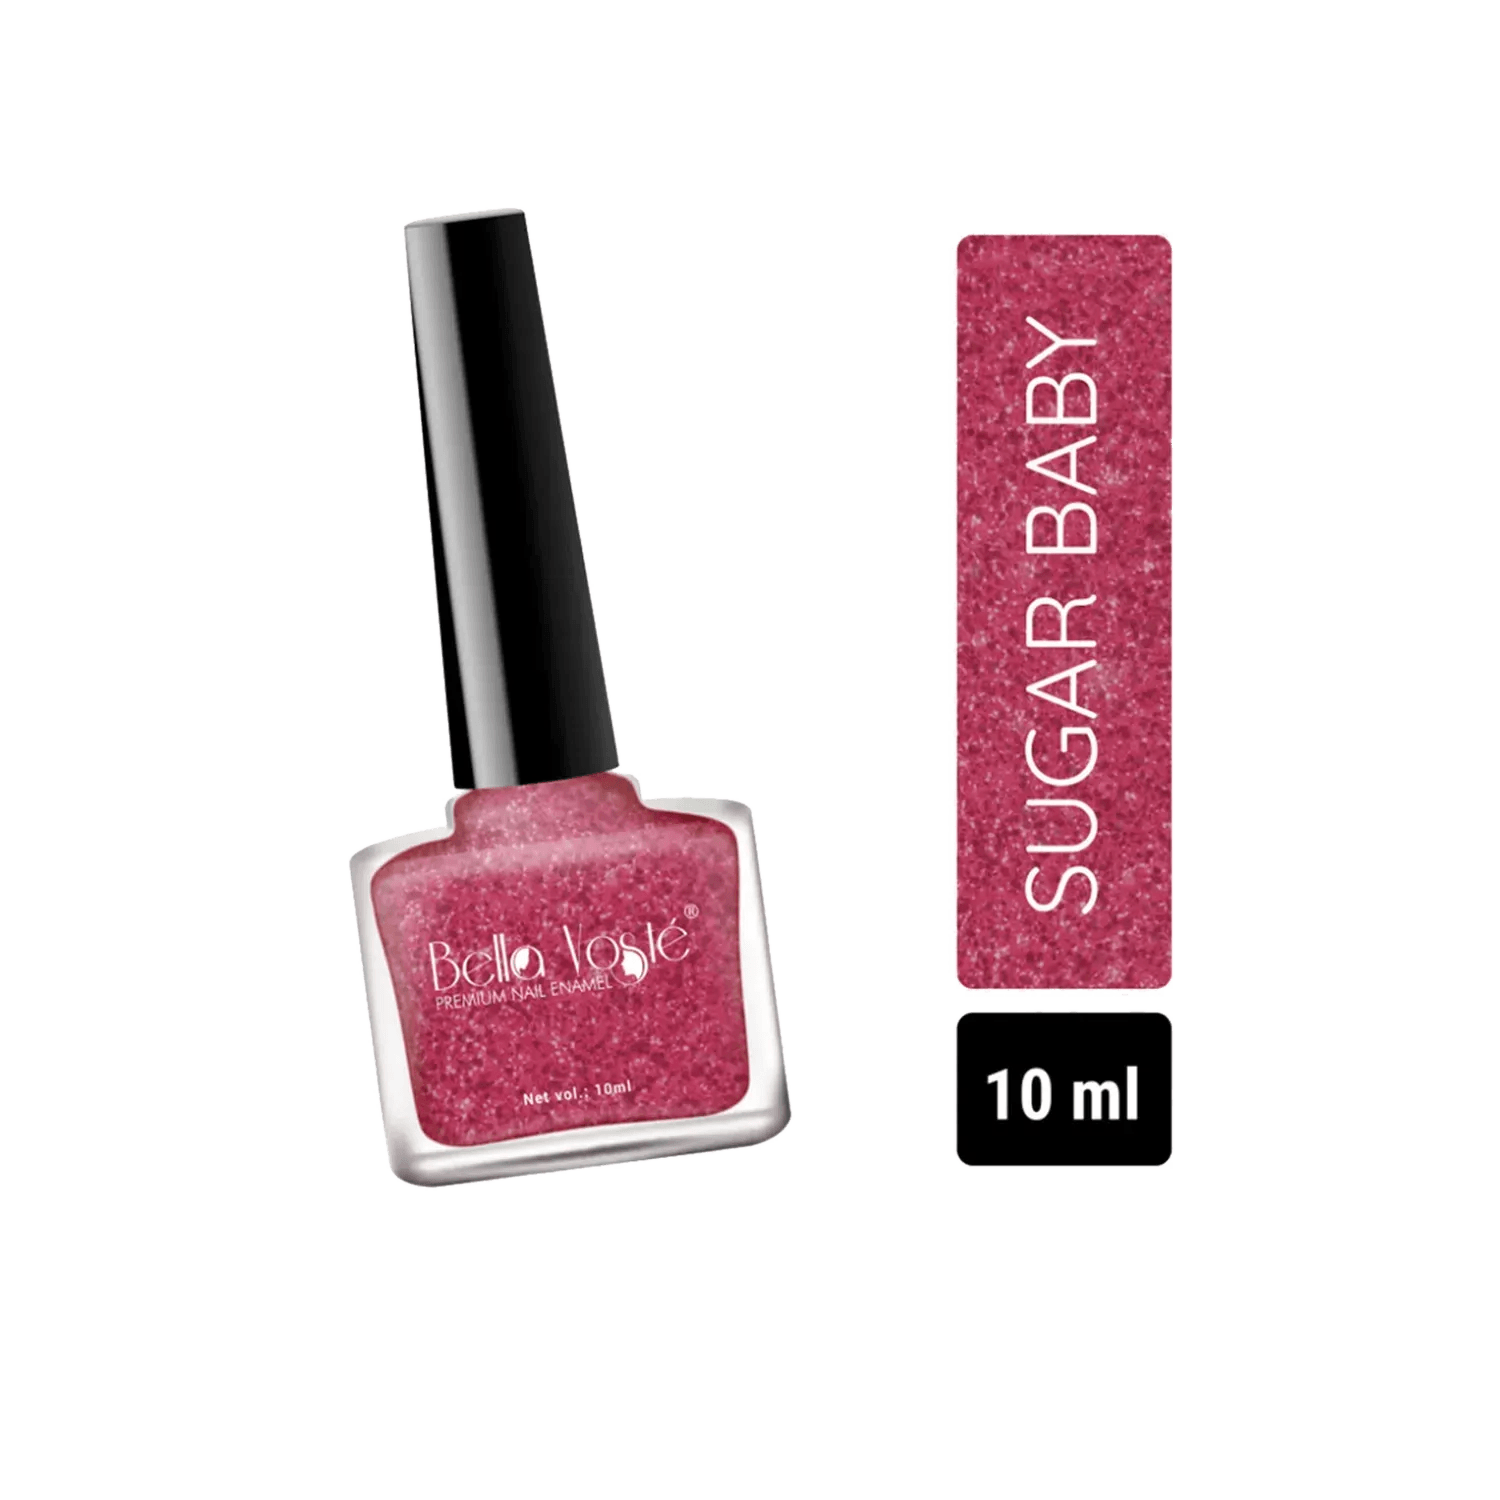 Bella Voste NAIL POLISH 9 ML SHADE NO. 29 CORAL FLORAL PATEL COLLECTION (9  ml) CORAL FLORAL - Price in India, Buy Bella Voste NAIL POLISH 9 ML SHADE  NO. 29 CORAL